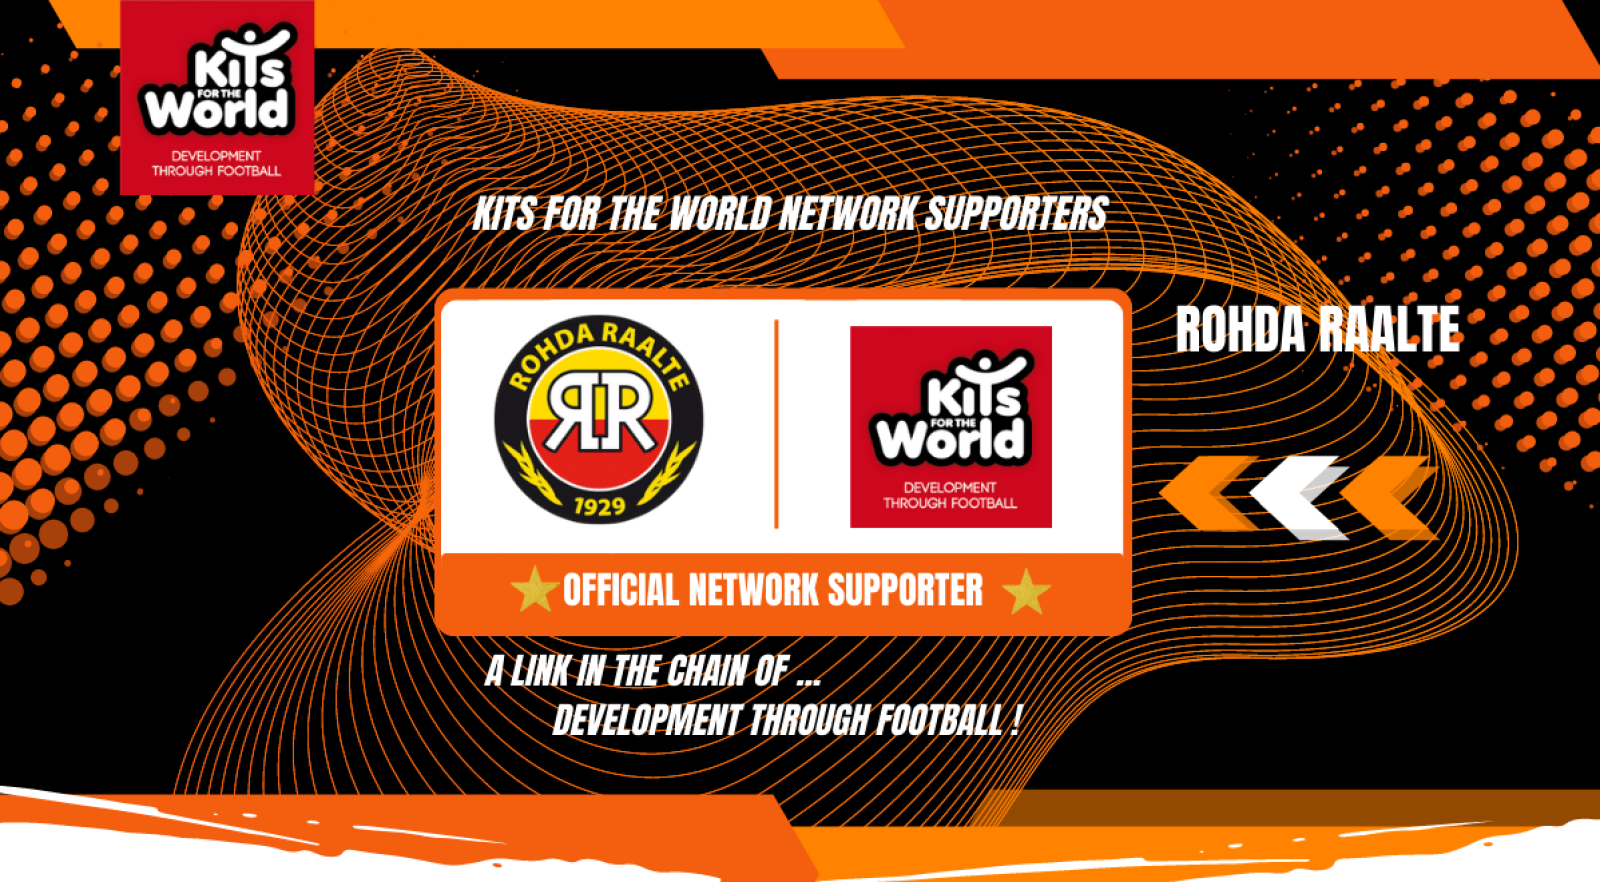 rohda raalte_official NETWORK SUPPORTER _Kits for the World